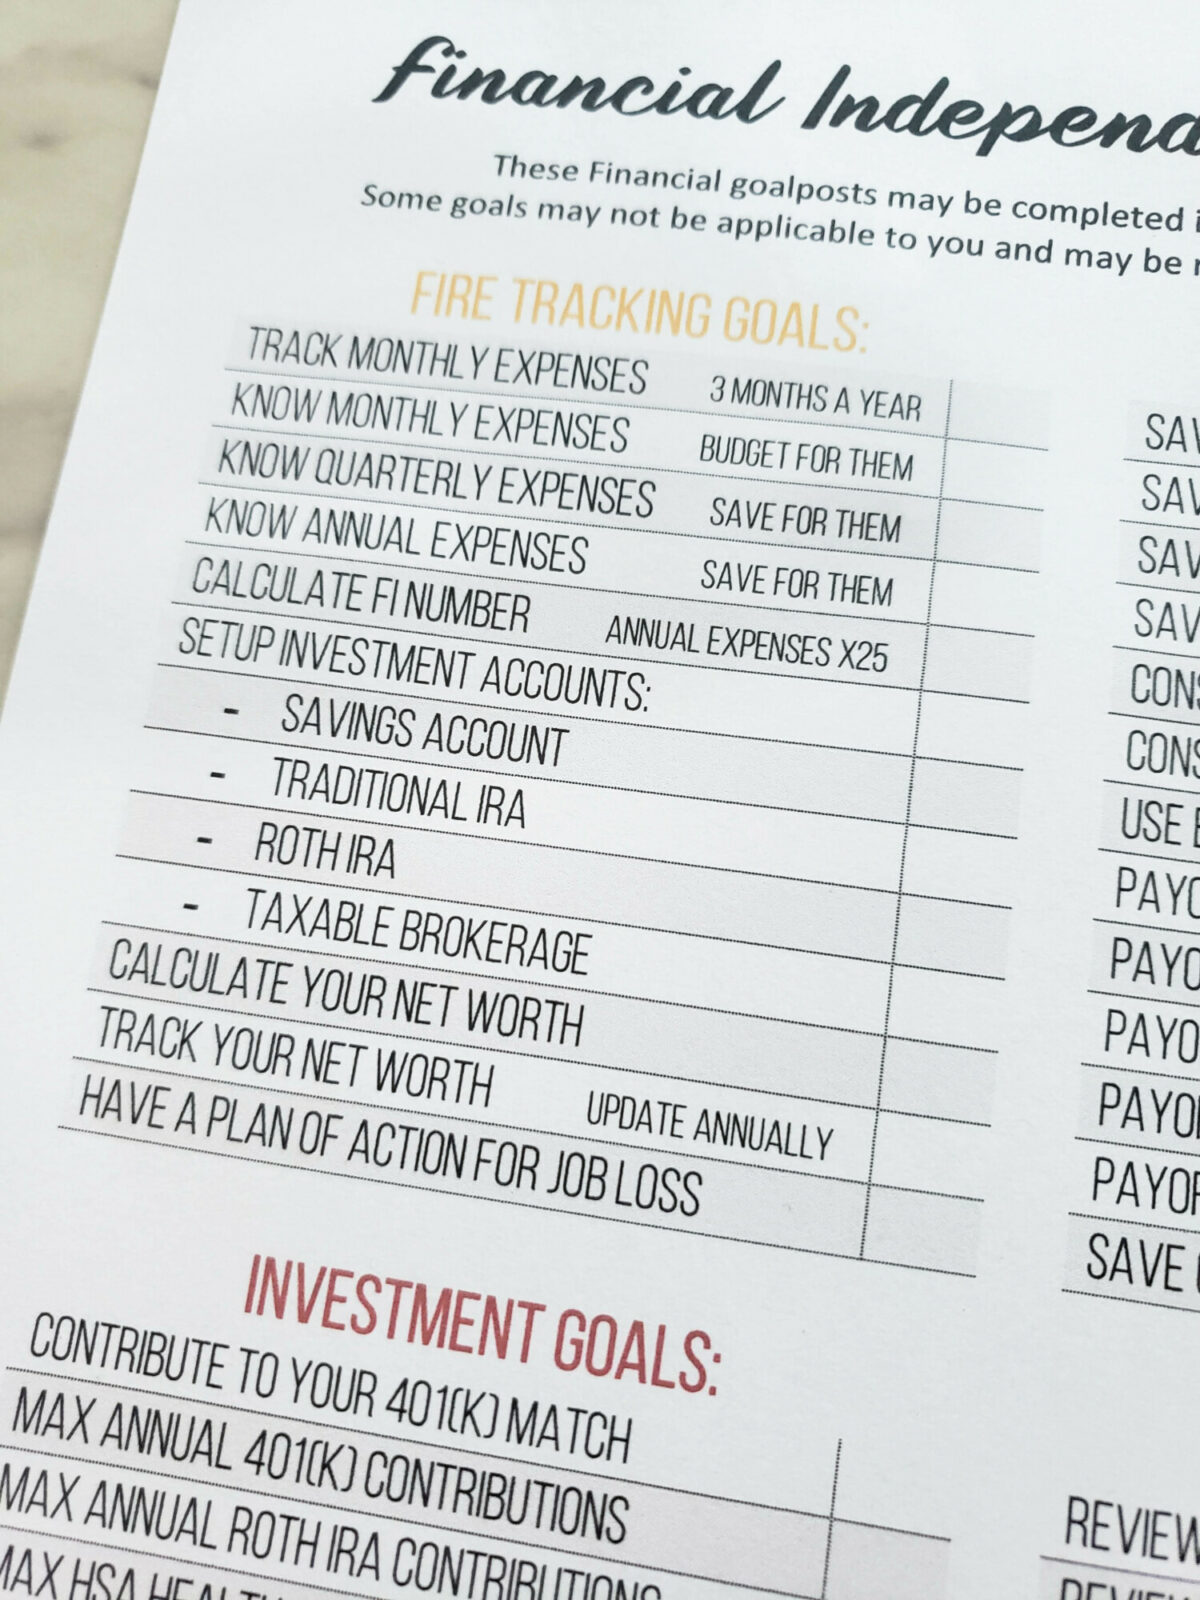 Financial Independence Checklist  - Printable F.I.R.E. goals and milestones - Tracking FI goals along the way